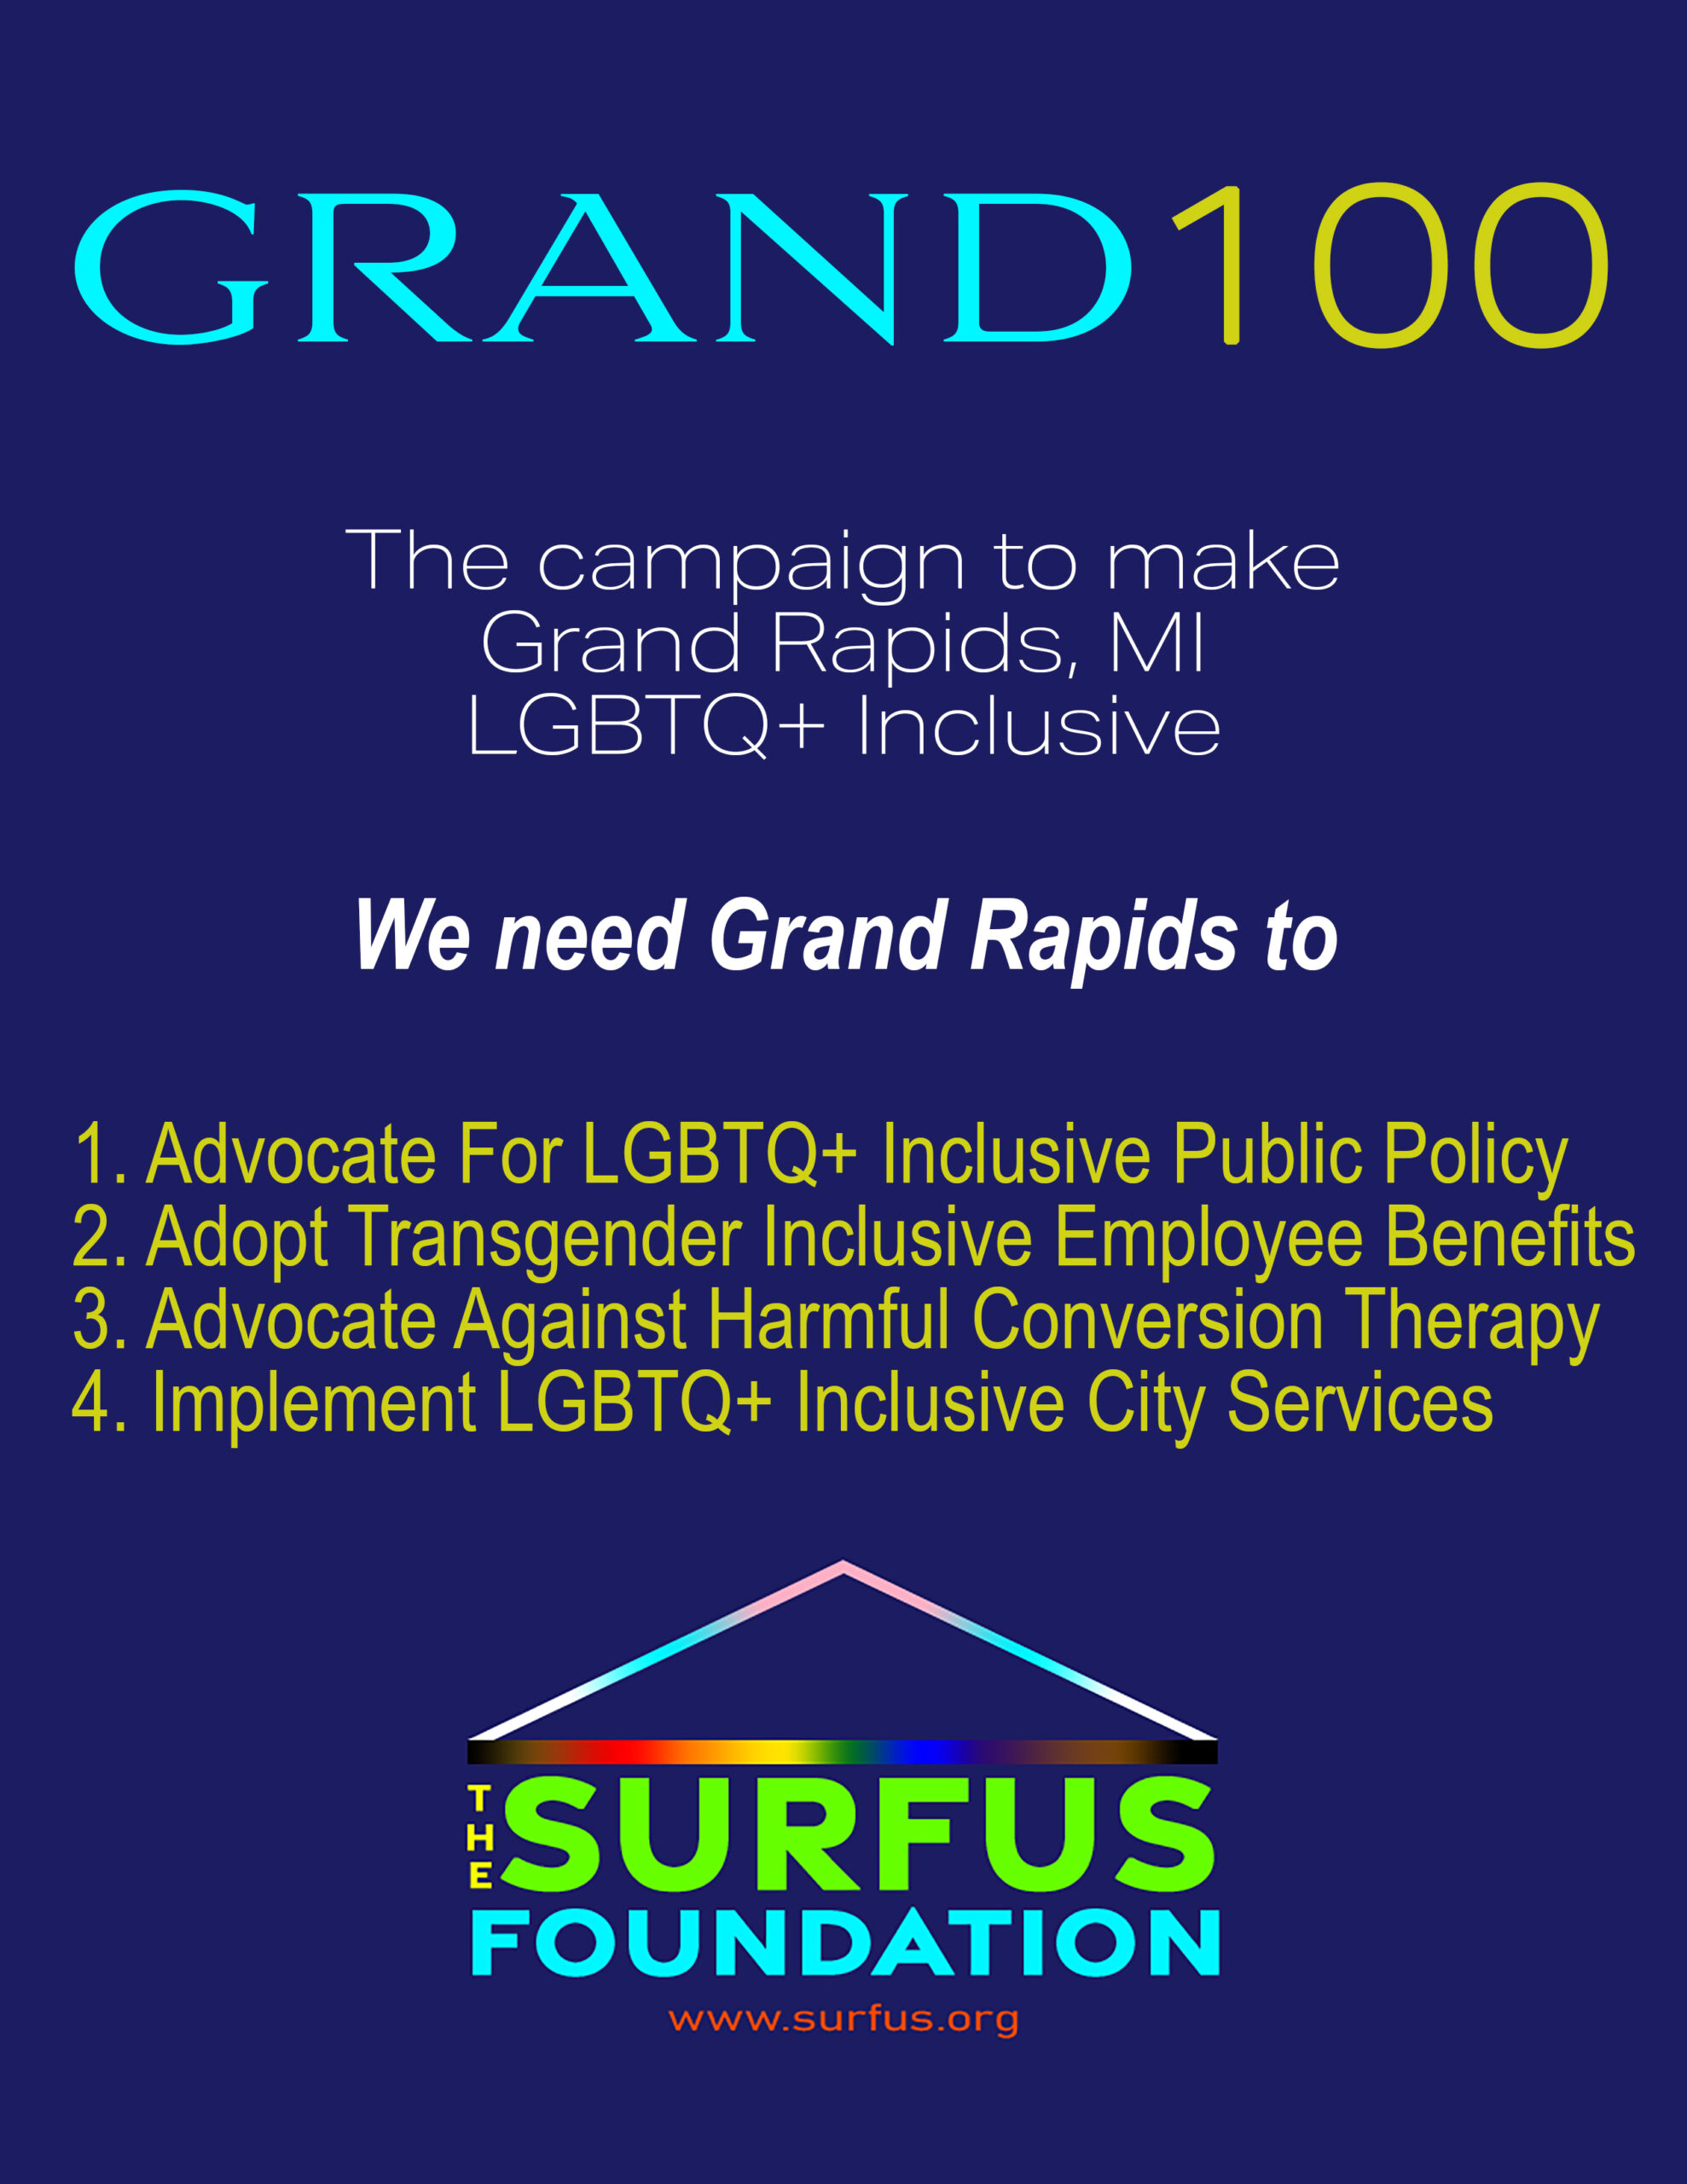 Grand 100 Campaign The campaign to make Grand Rapids, MI LGBTQ+ Inclusive We need Grand Rapids to: 1. Advocate For LGBTQ+ Inclusive Public Policy 2. Adopt Transgender Inclusive Employee Benefits 3. Advocate Against Harmful Conversion Therapy 4. Implement LGBTQ+ Inclusive City Services Image: This image is The Surfus Foundation's prior logo from 2021-22.